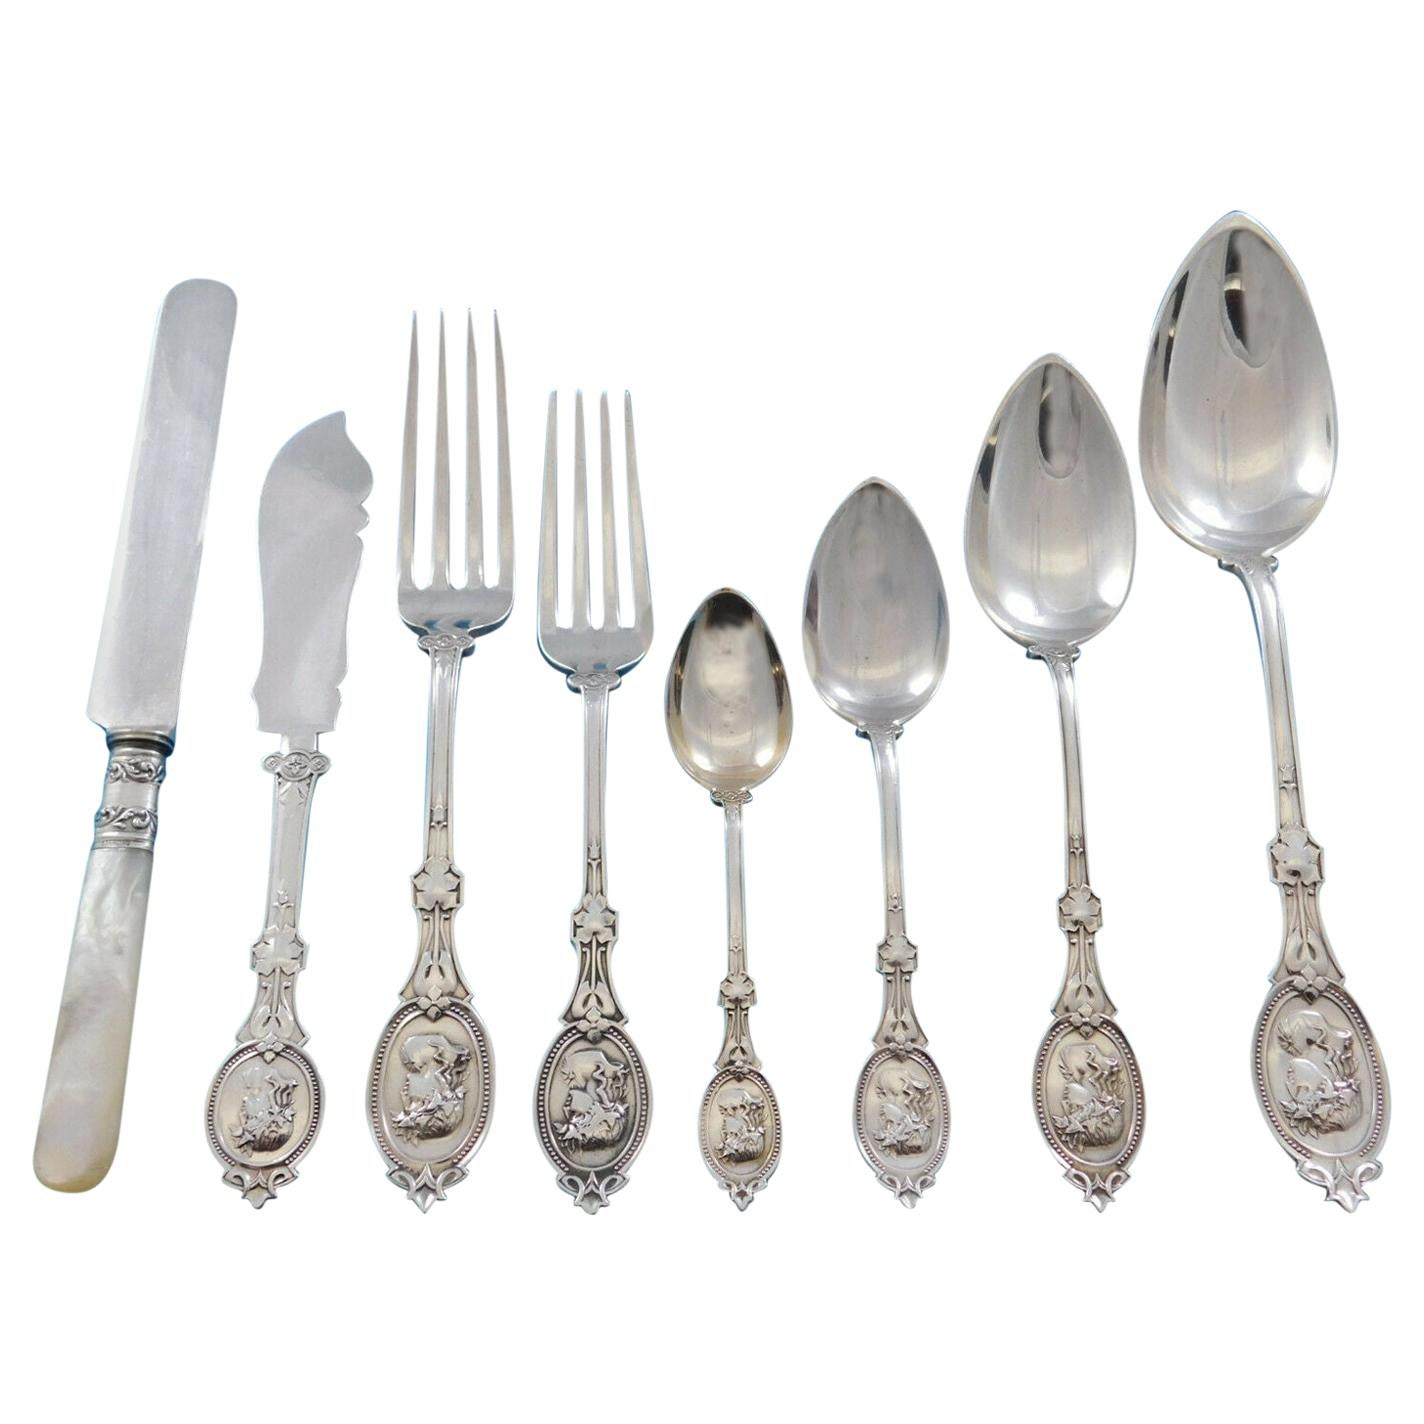 Medallion by H&S Sterling Silver Flatware Service for 12 Set 104 Pieces